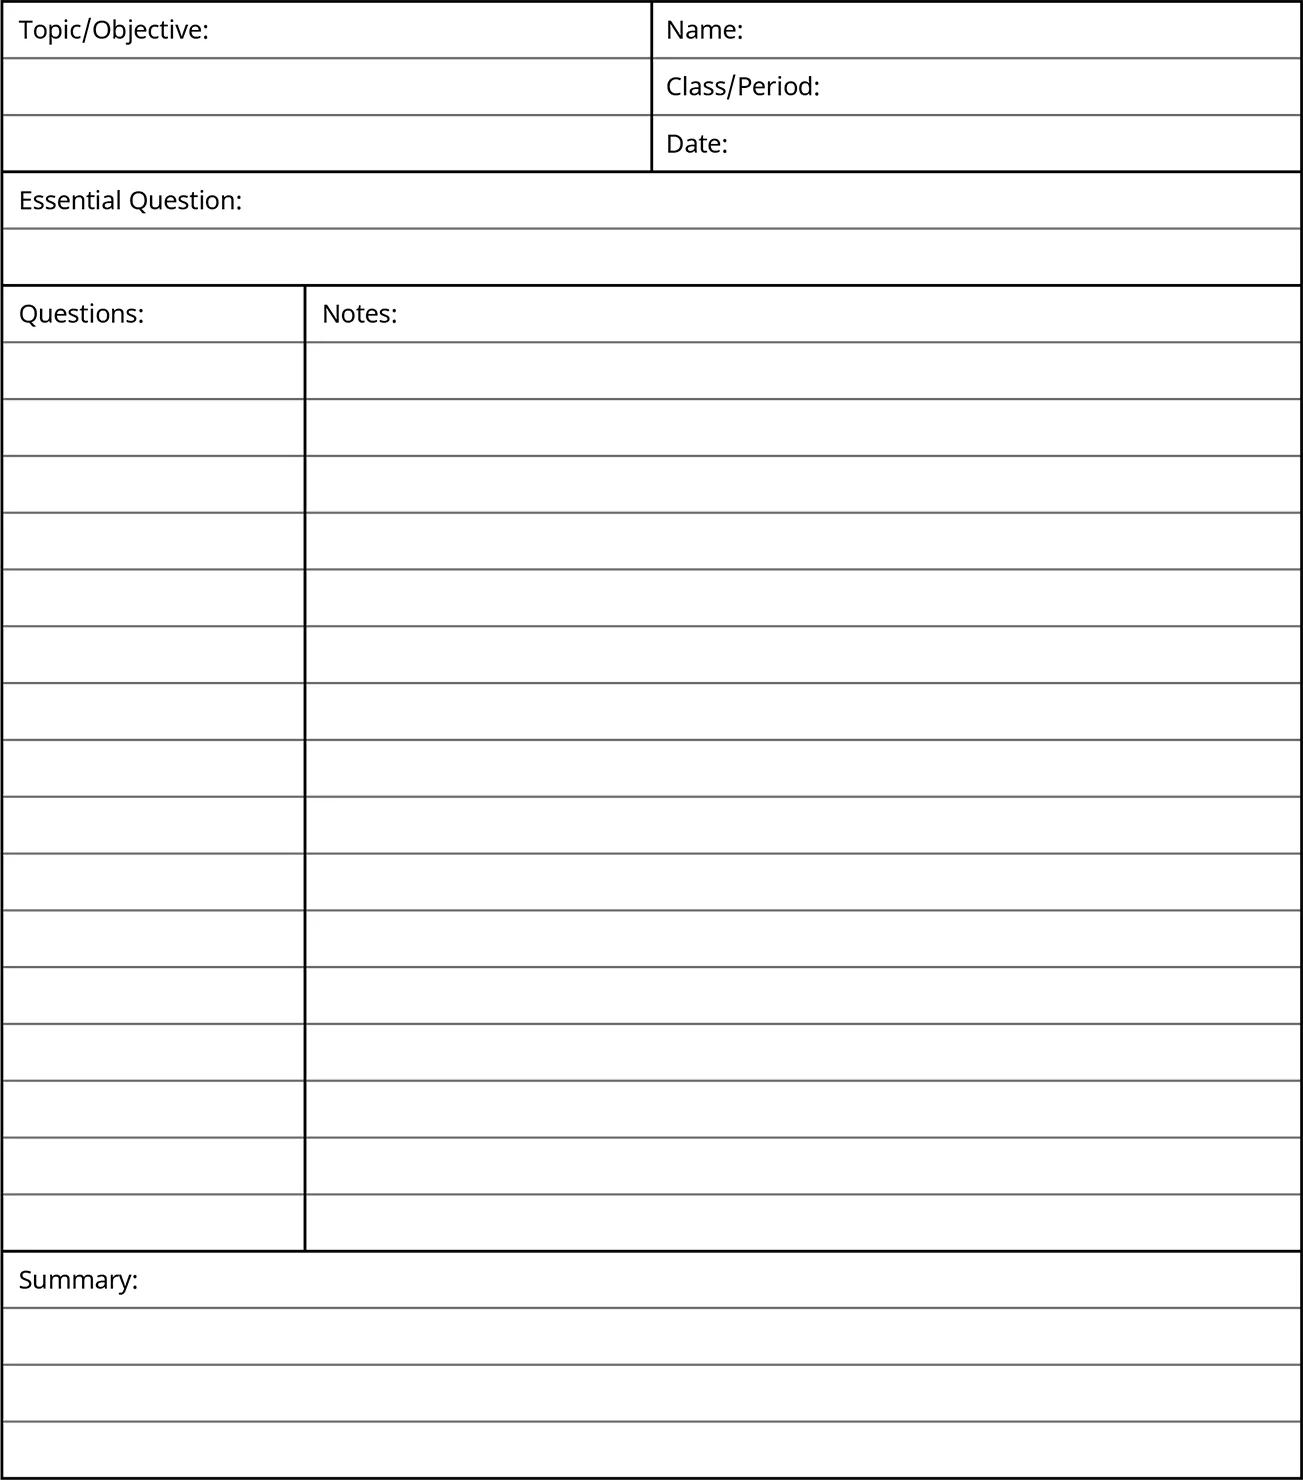 A sample of the Cornell note template has rows and columns for “Topic/Objective,” “Name,” “Class/Period,” “Date,” “Essential Question,” “Questions,” “Notes,” and “Summary.”